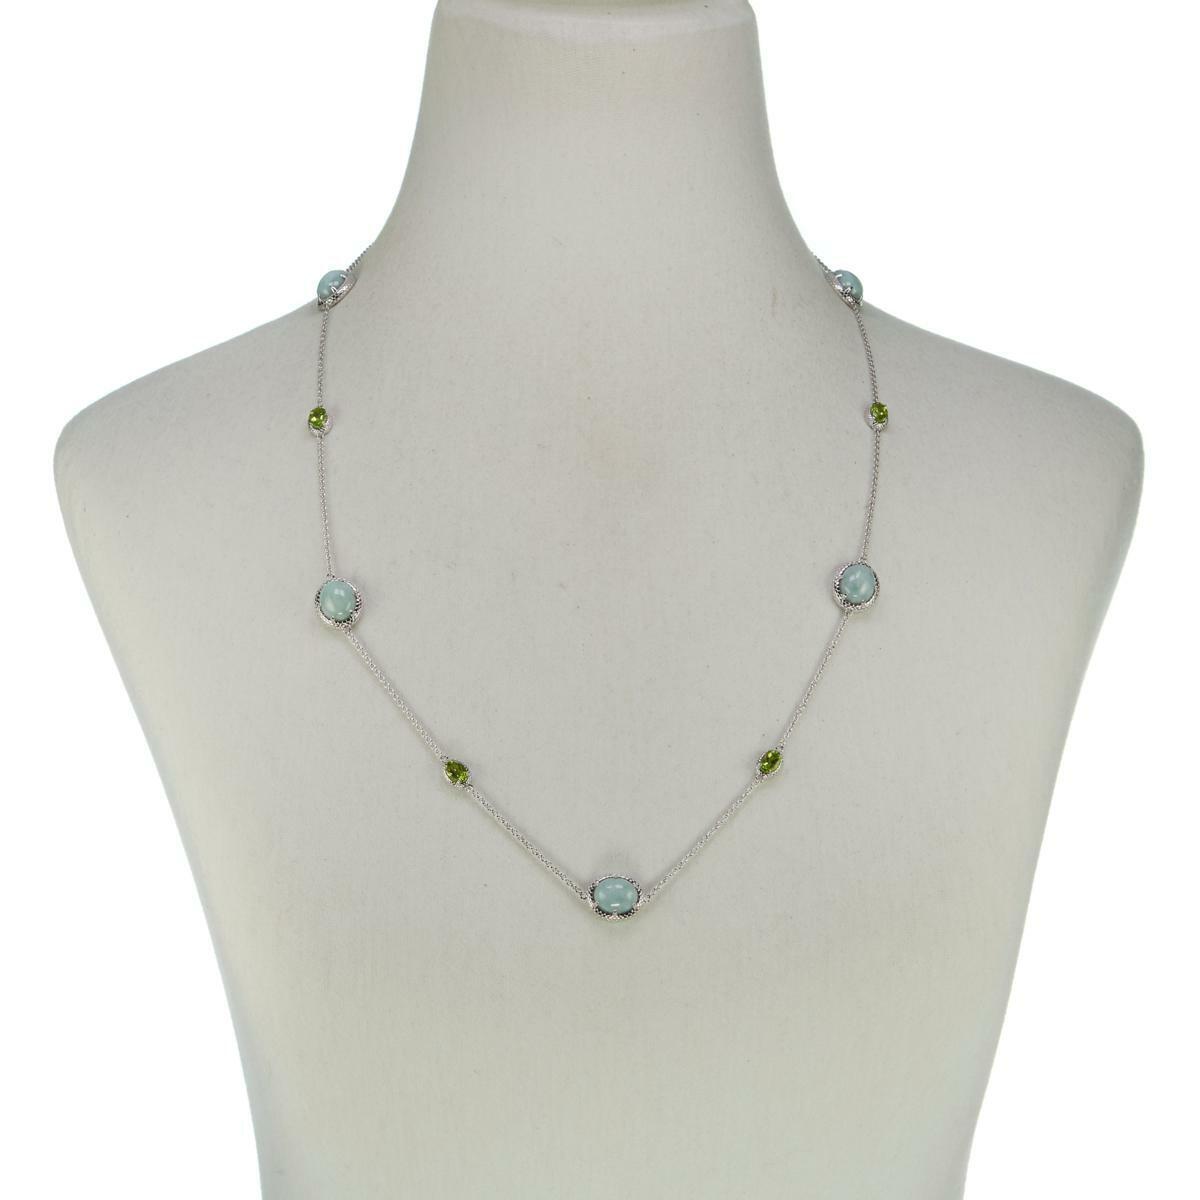 Jade of Yesteryear Green Jade and Peridot 28" Necklace - HSN $140